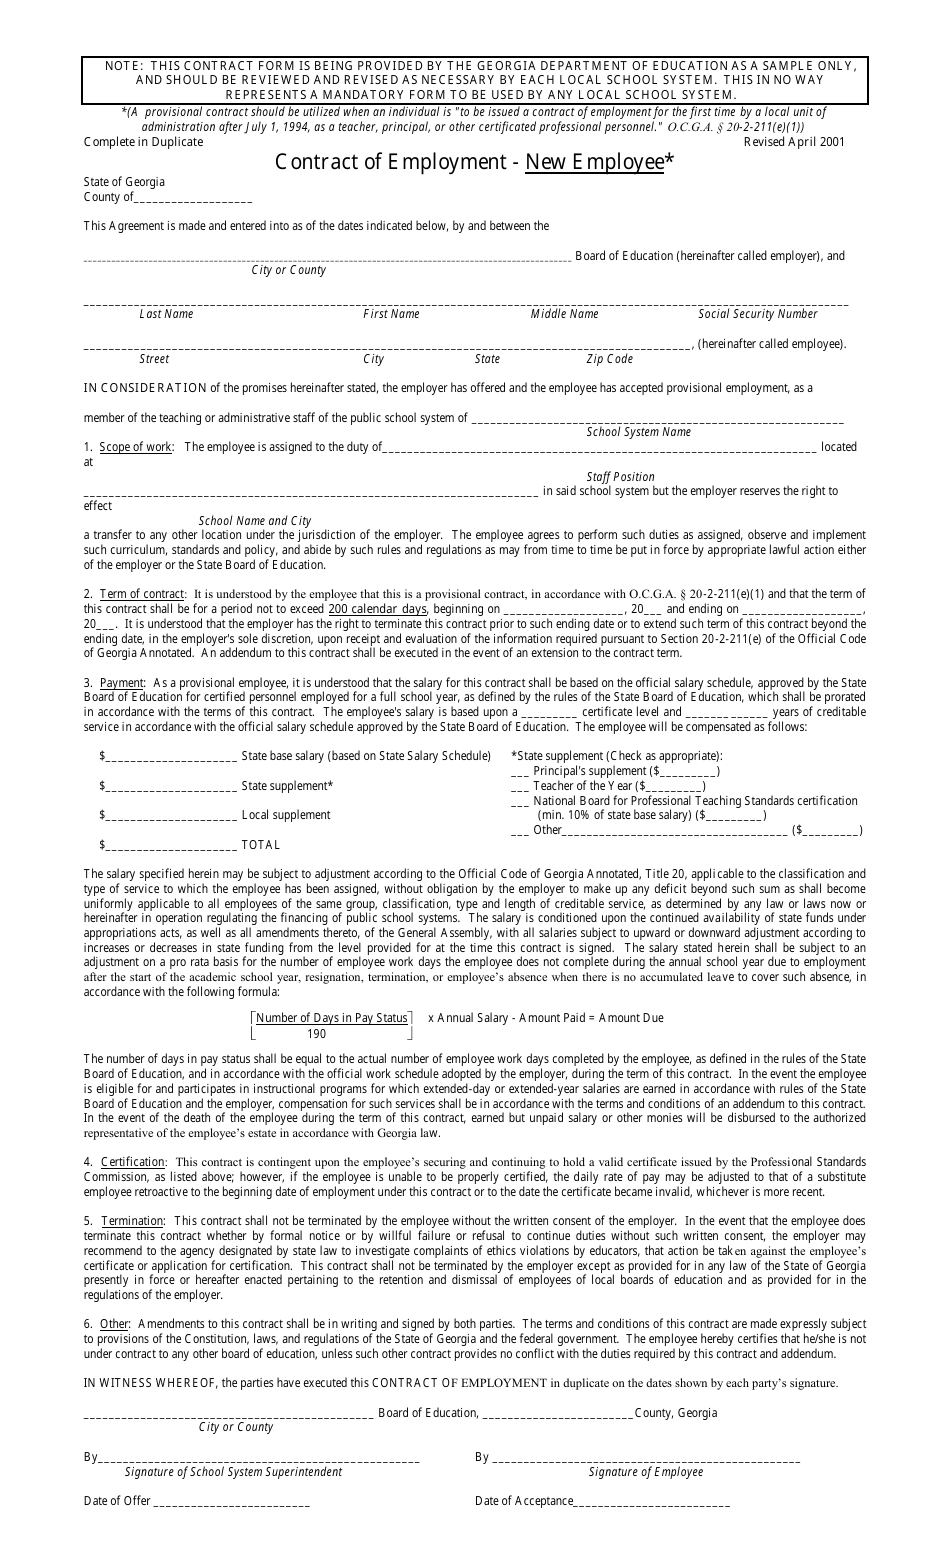 Contract of Employment - New Employee - Georgia (United States), Page 1